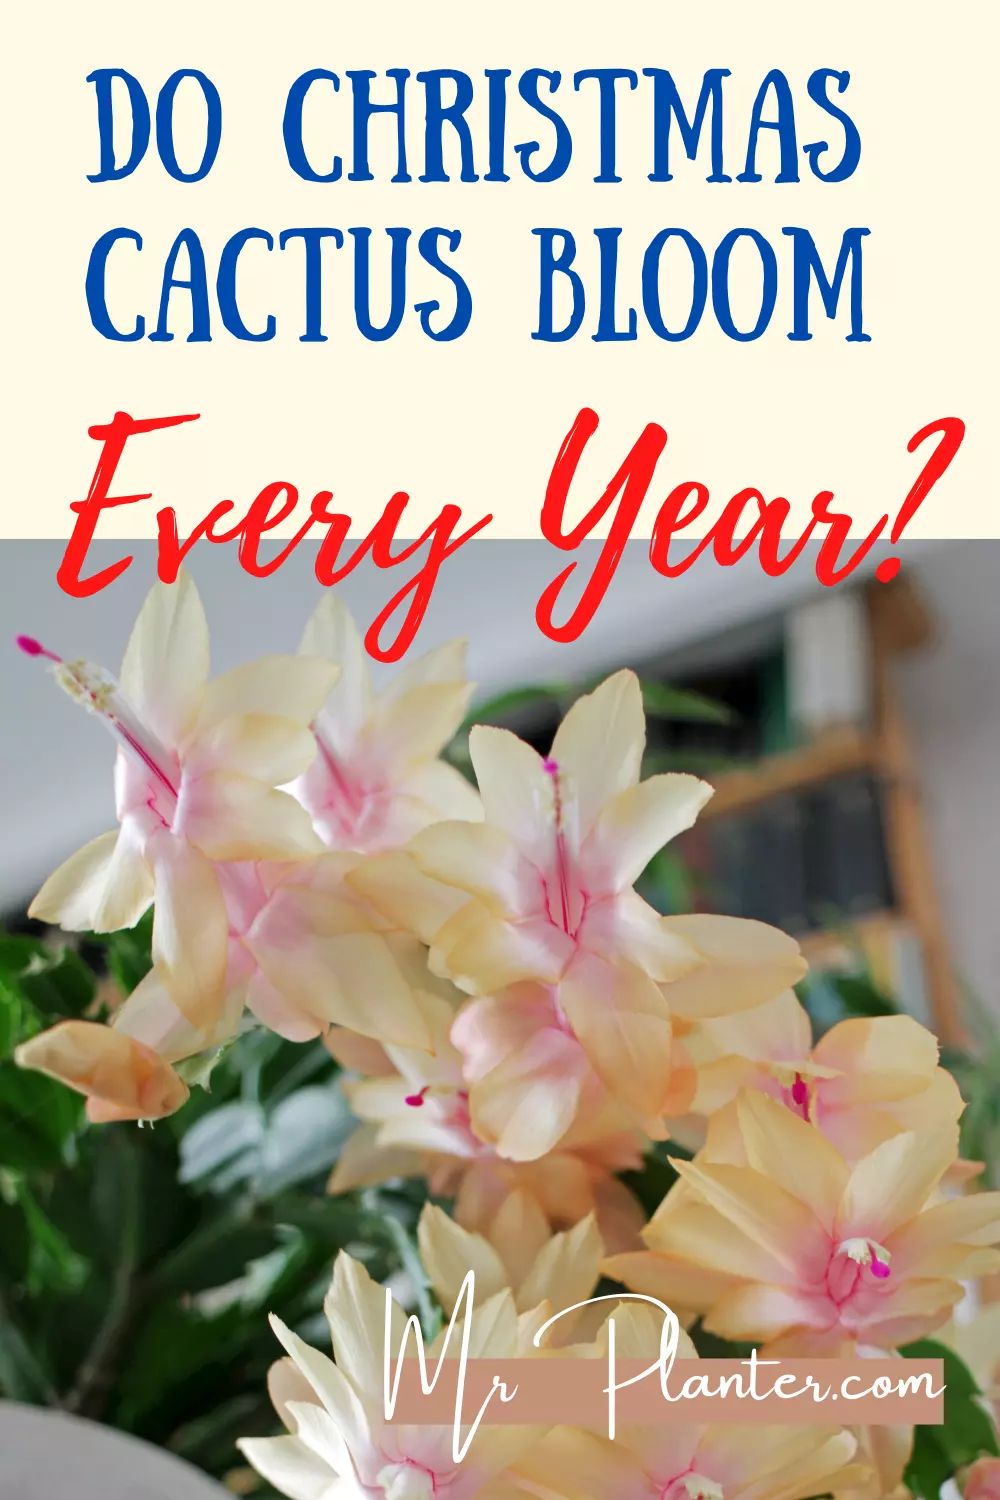 Pin on Christmas Cactus Bloom Frequency